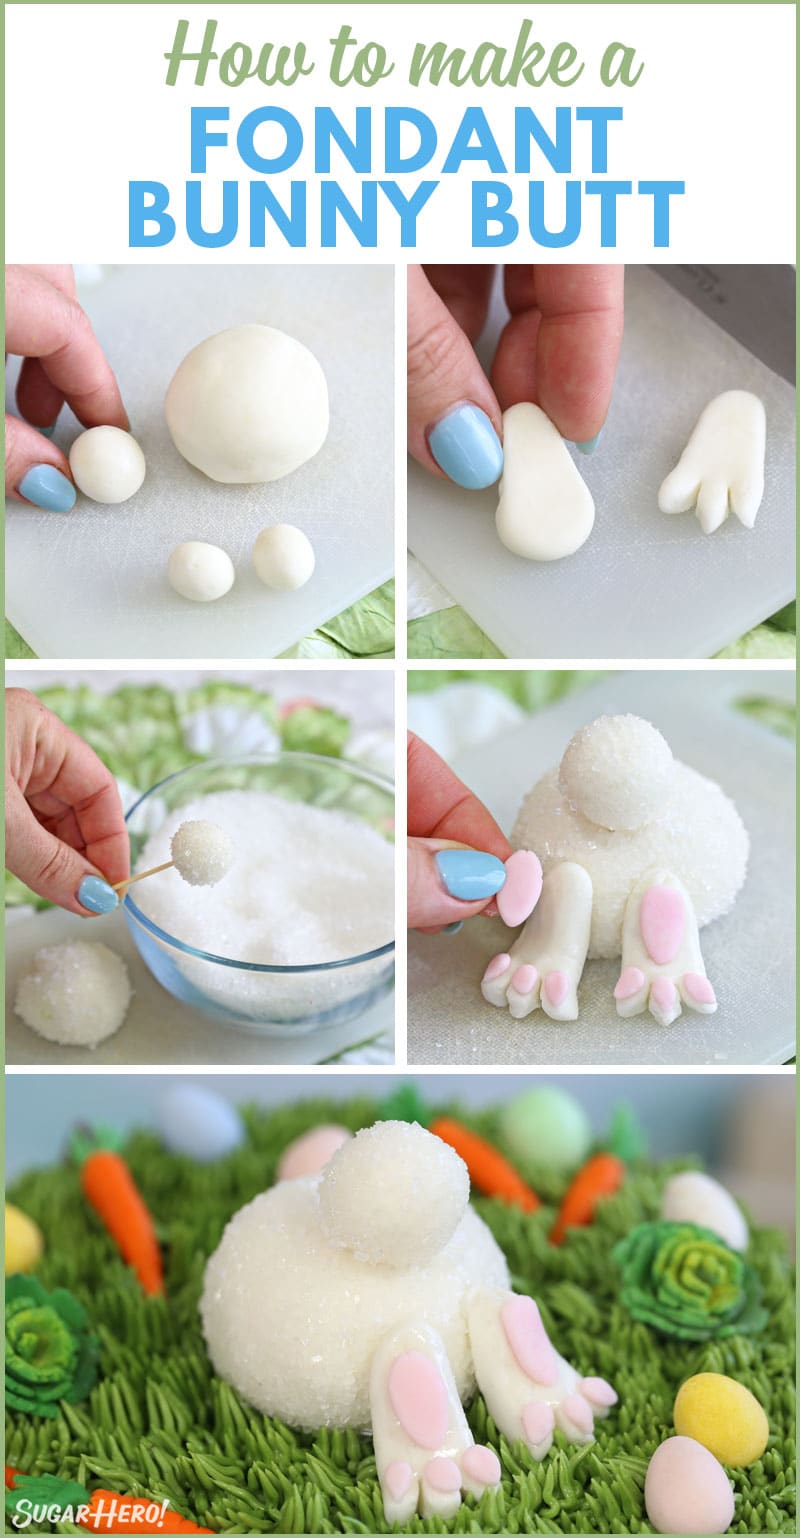 Five-part instructional collage showing how to make a bunny butt out of fondant and sparkling sugar